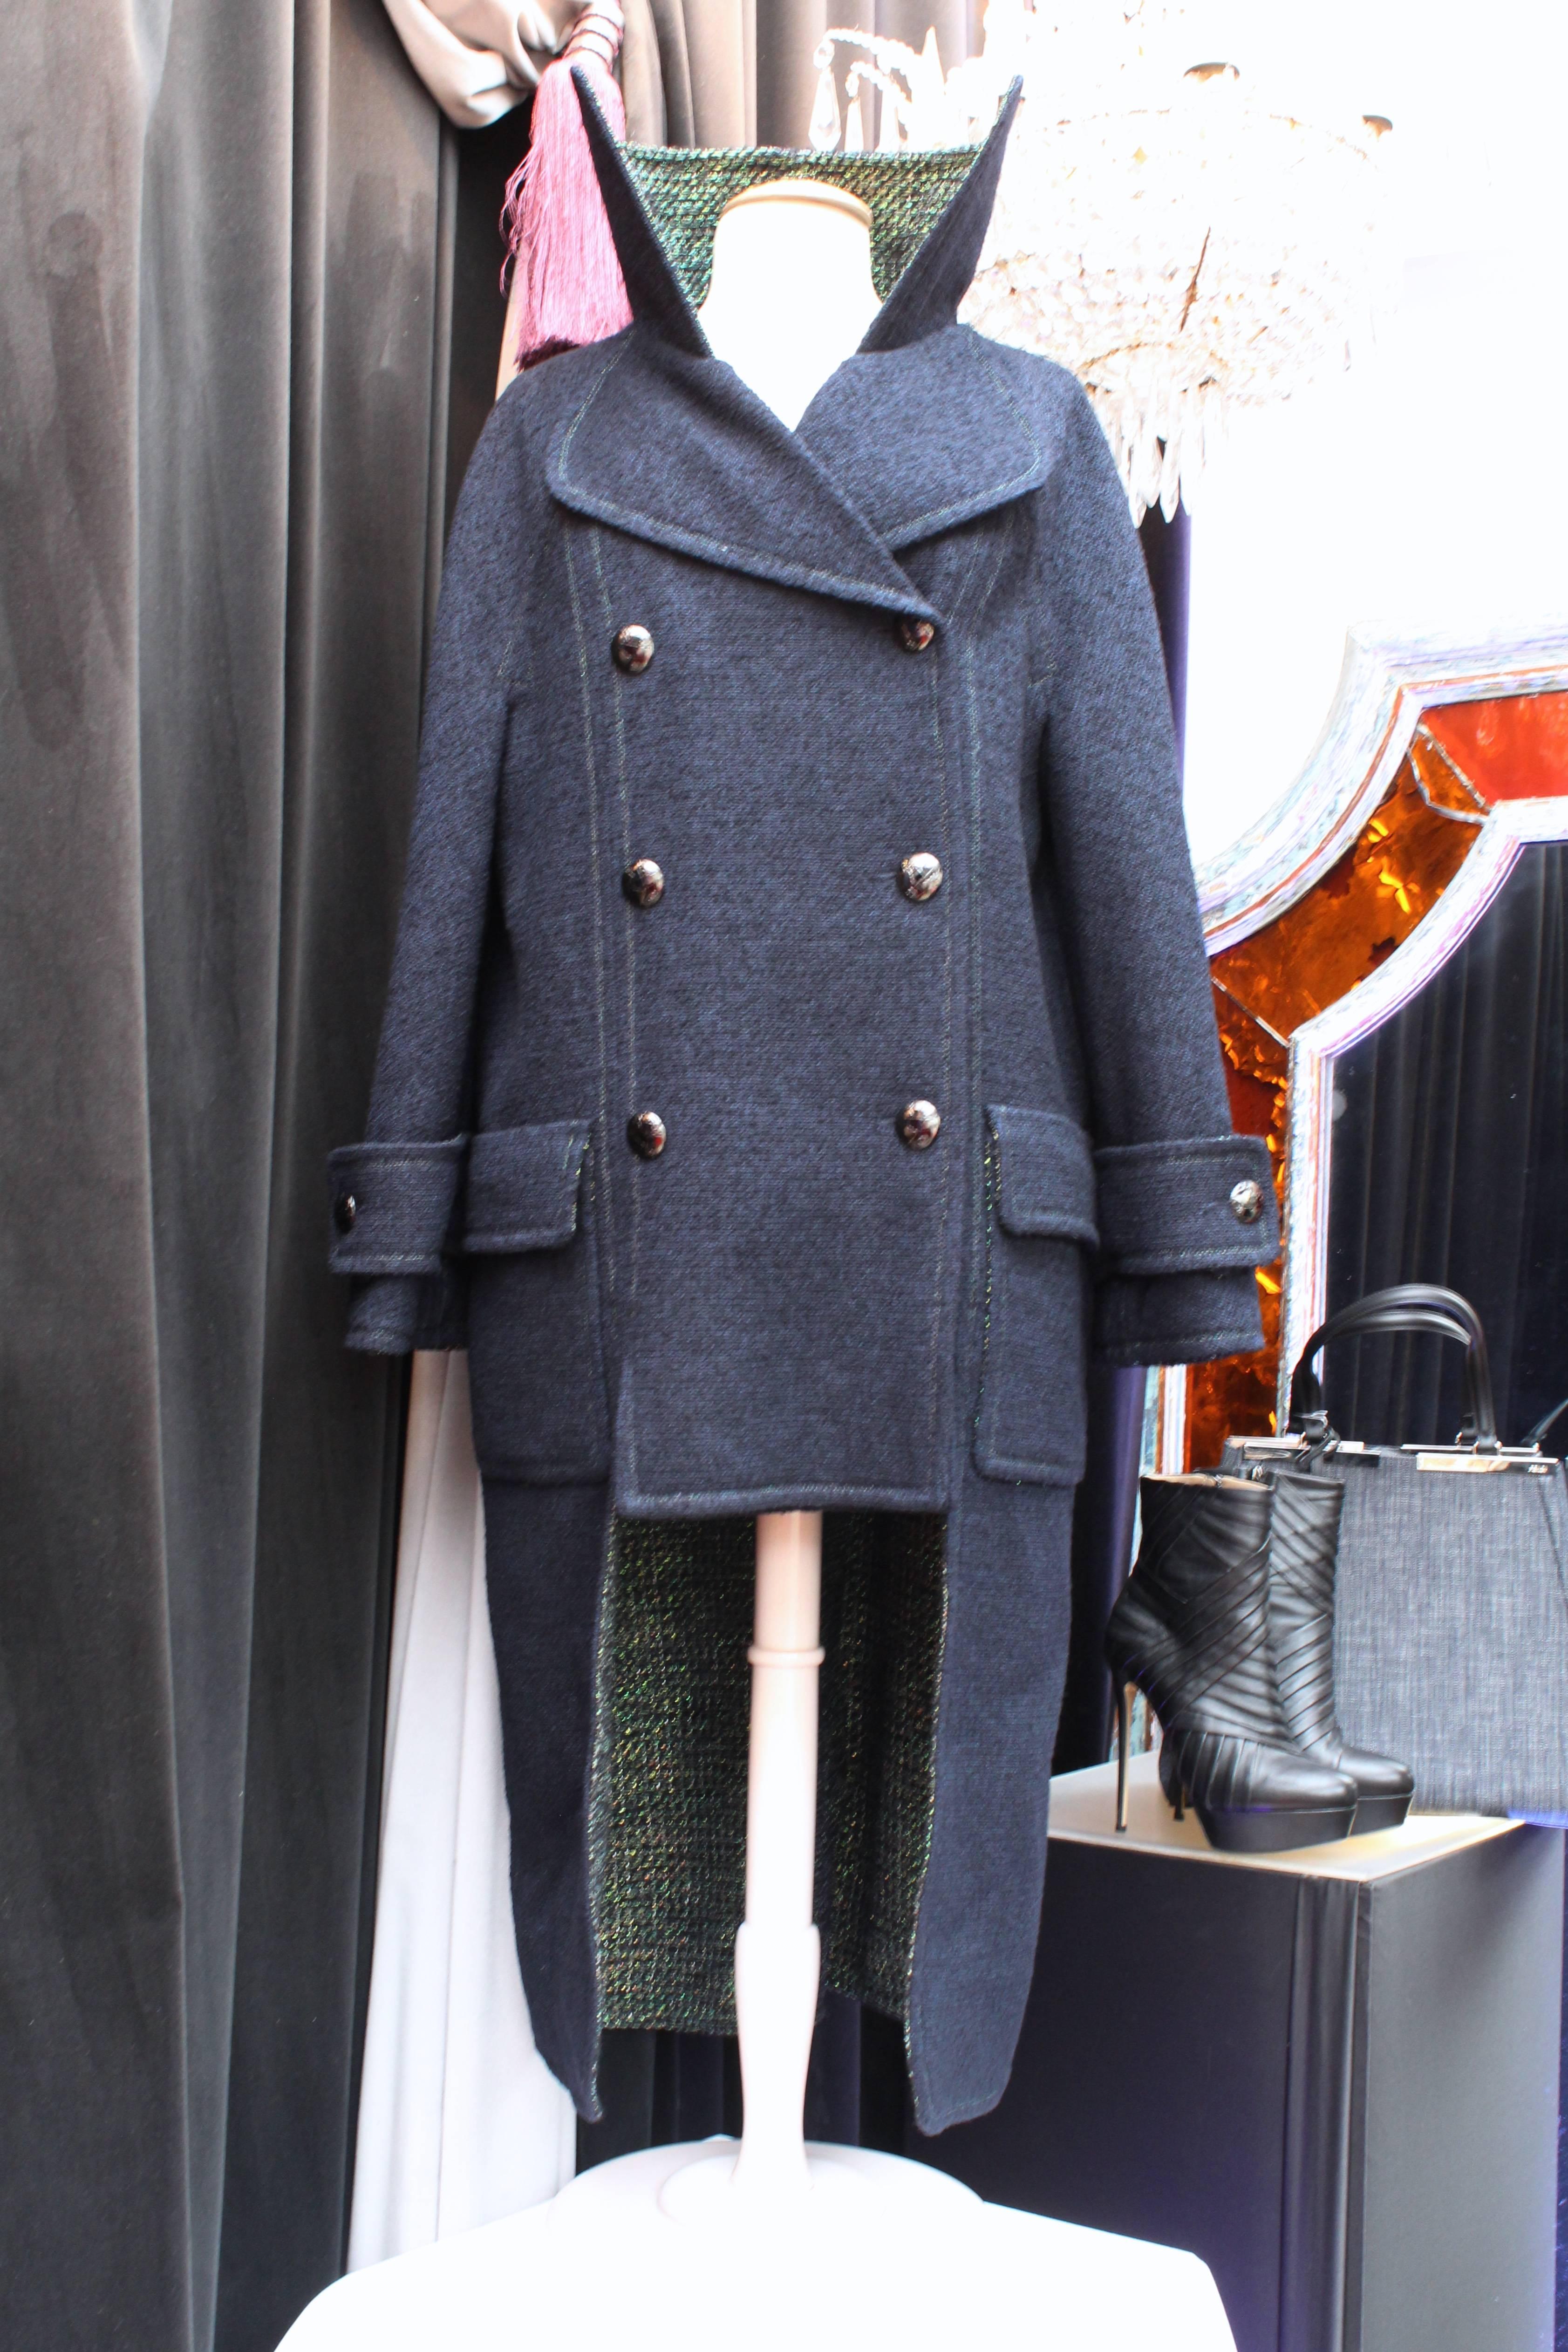 CHANEL (Made in France) Oversized coat in navy blue wool tweed in the outside and iridescent green lining, in a military style. 

It has a double collar, two large pockets in the front and is longer in the back with quite edgy cuts. 

This coat